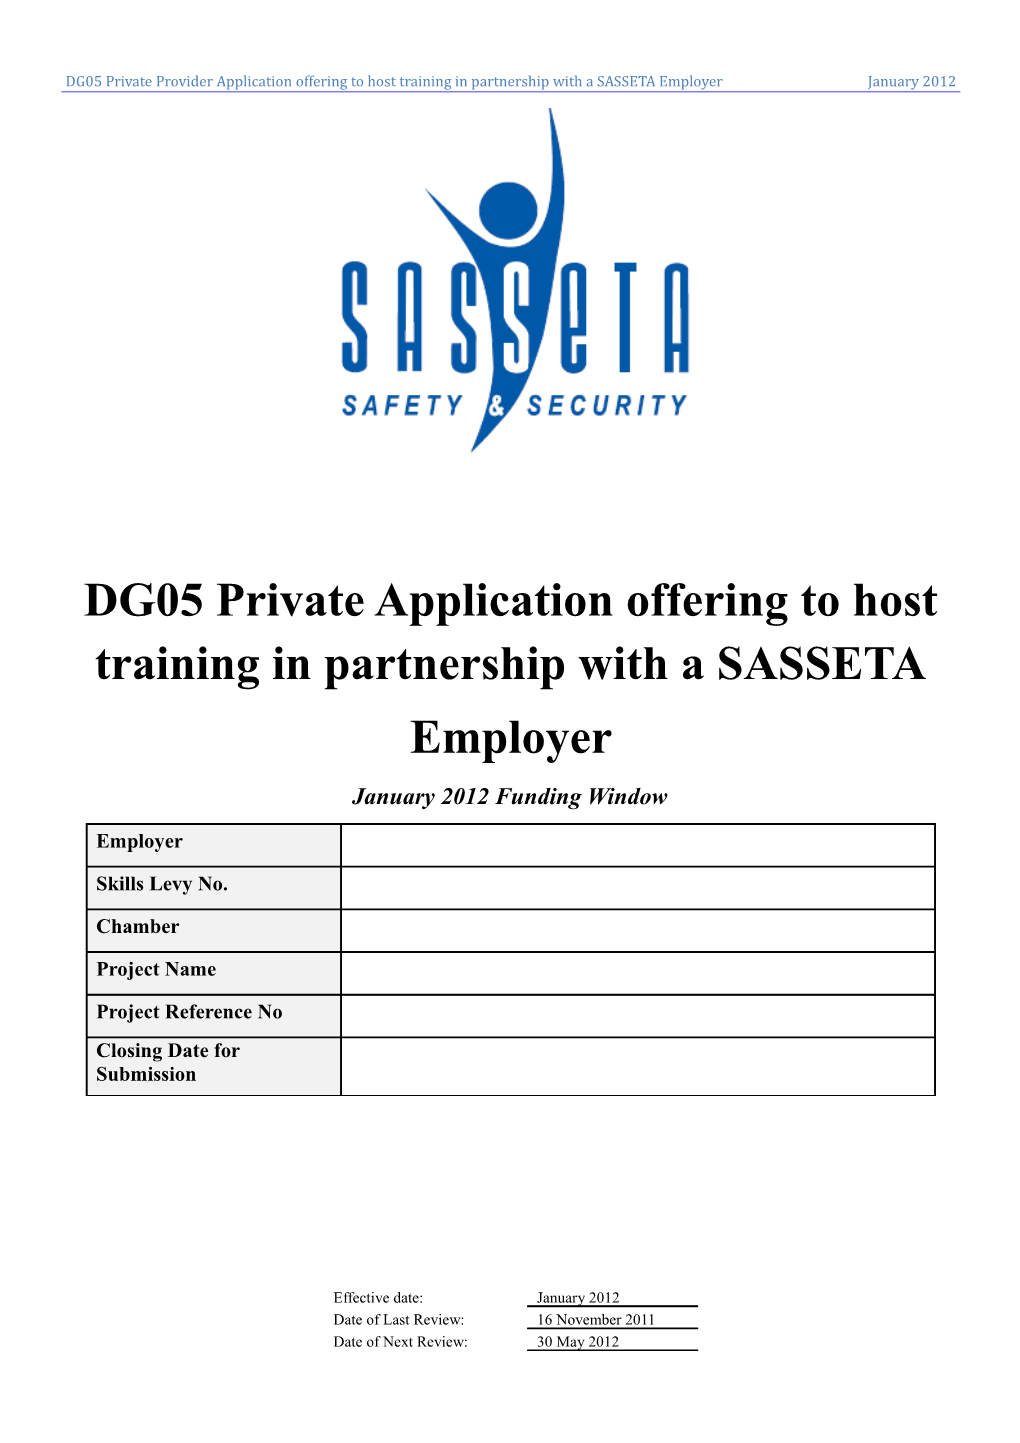 DG05 Private Application Offering to Host Training in Partnership with a SASSETA